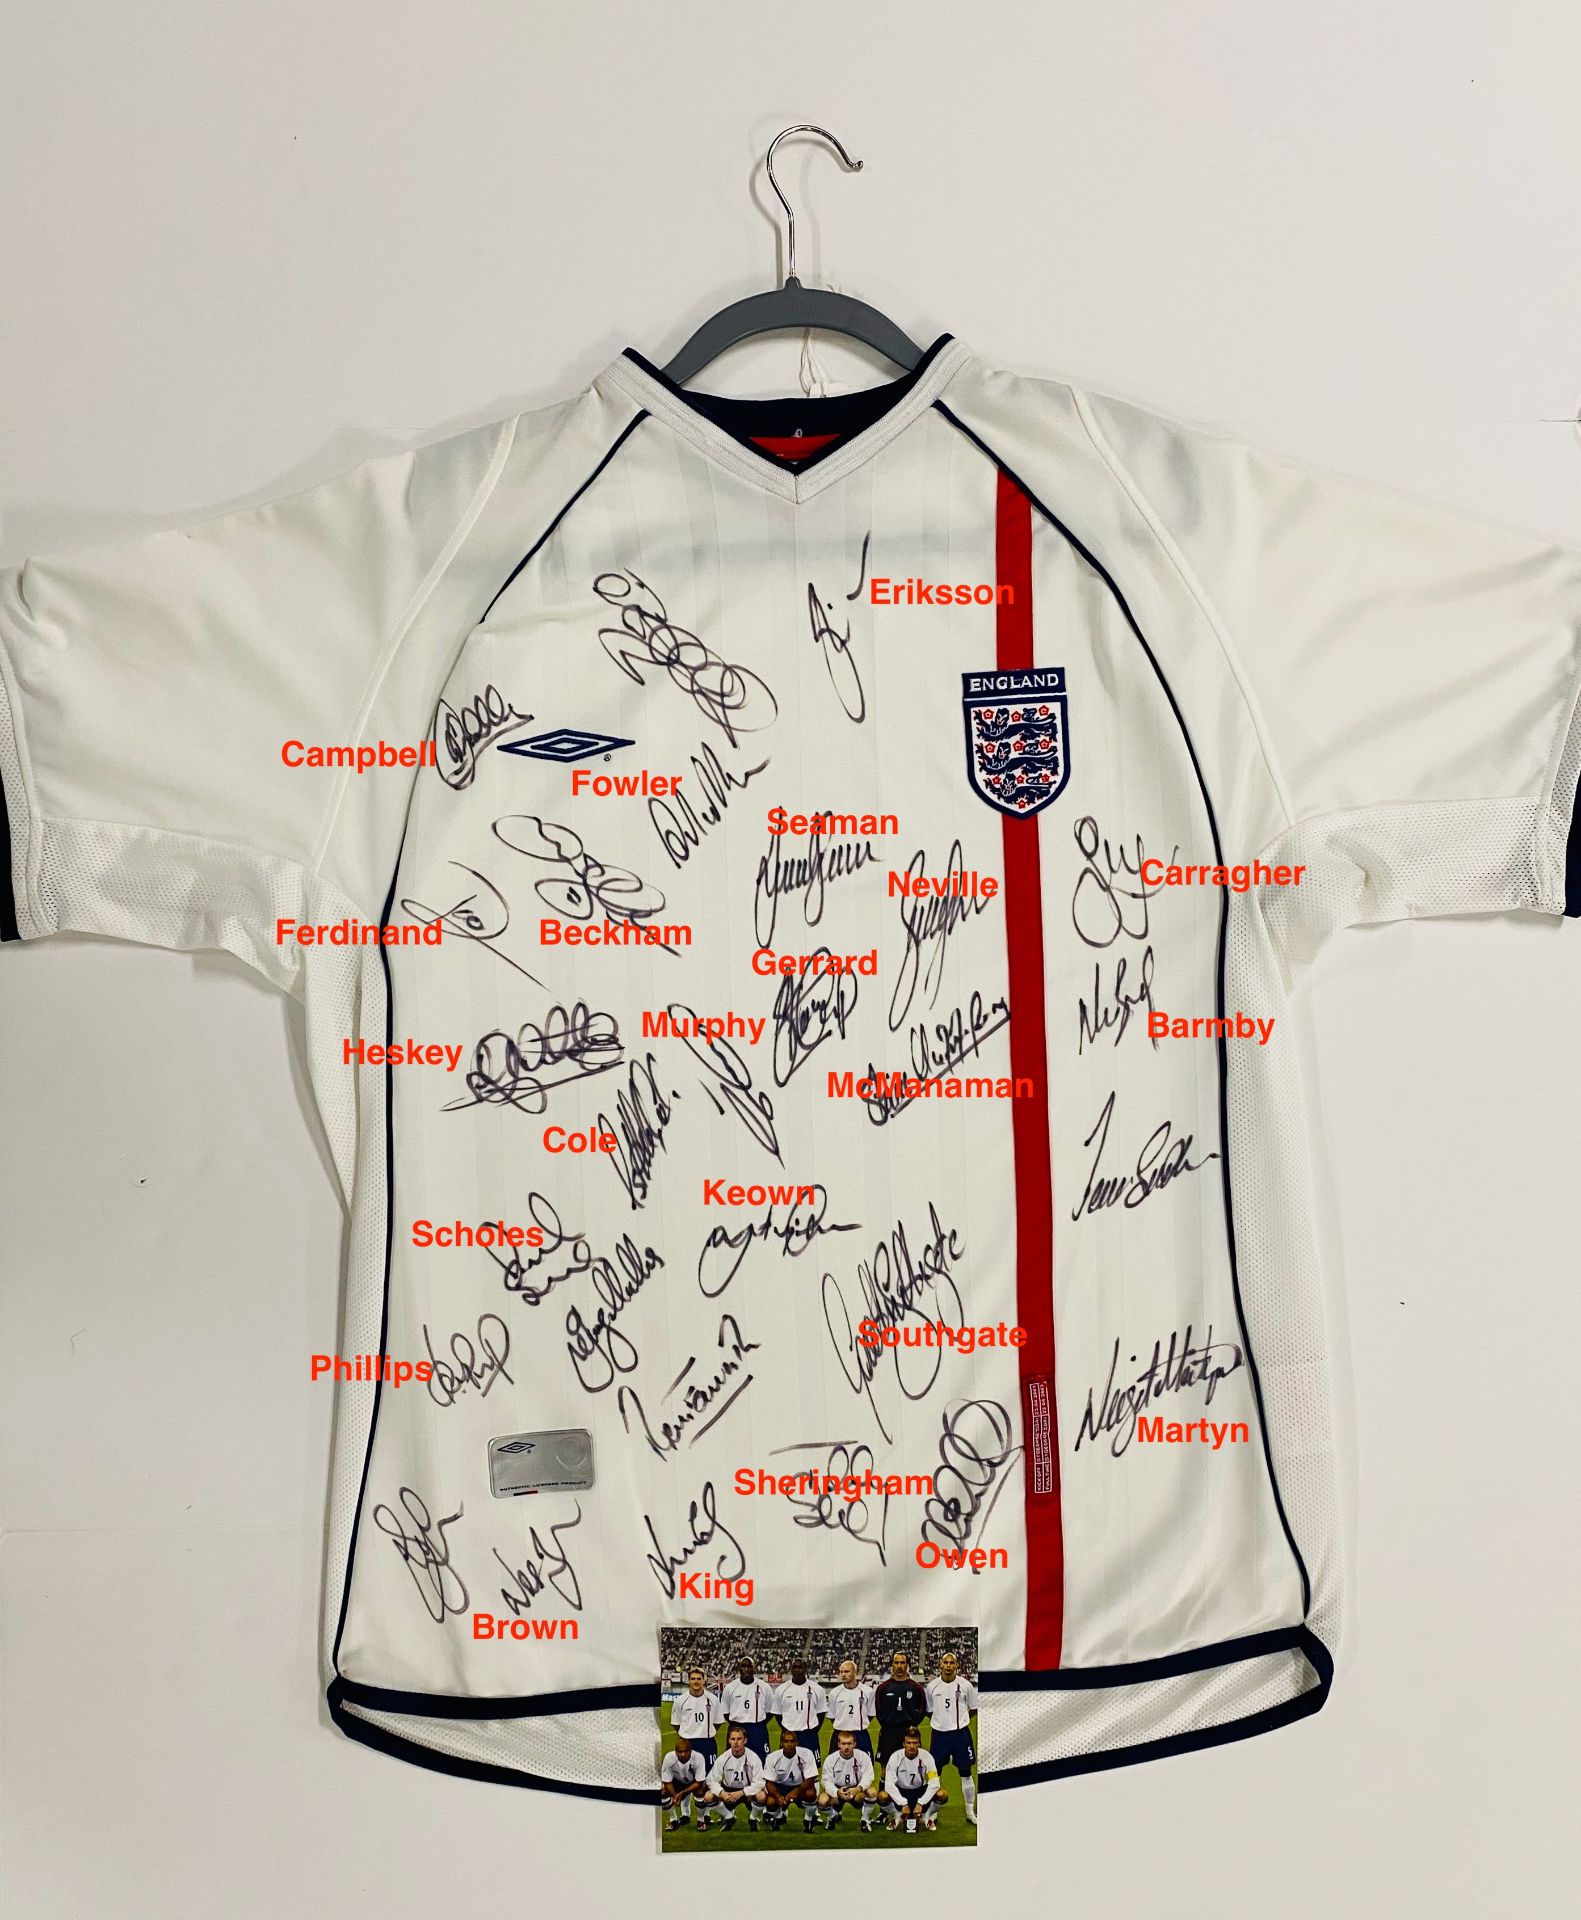 England 2001/2002 signed jersey (S220) - Image 2 of 2